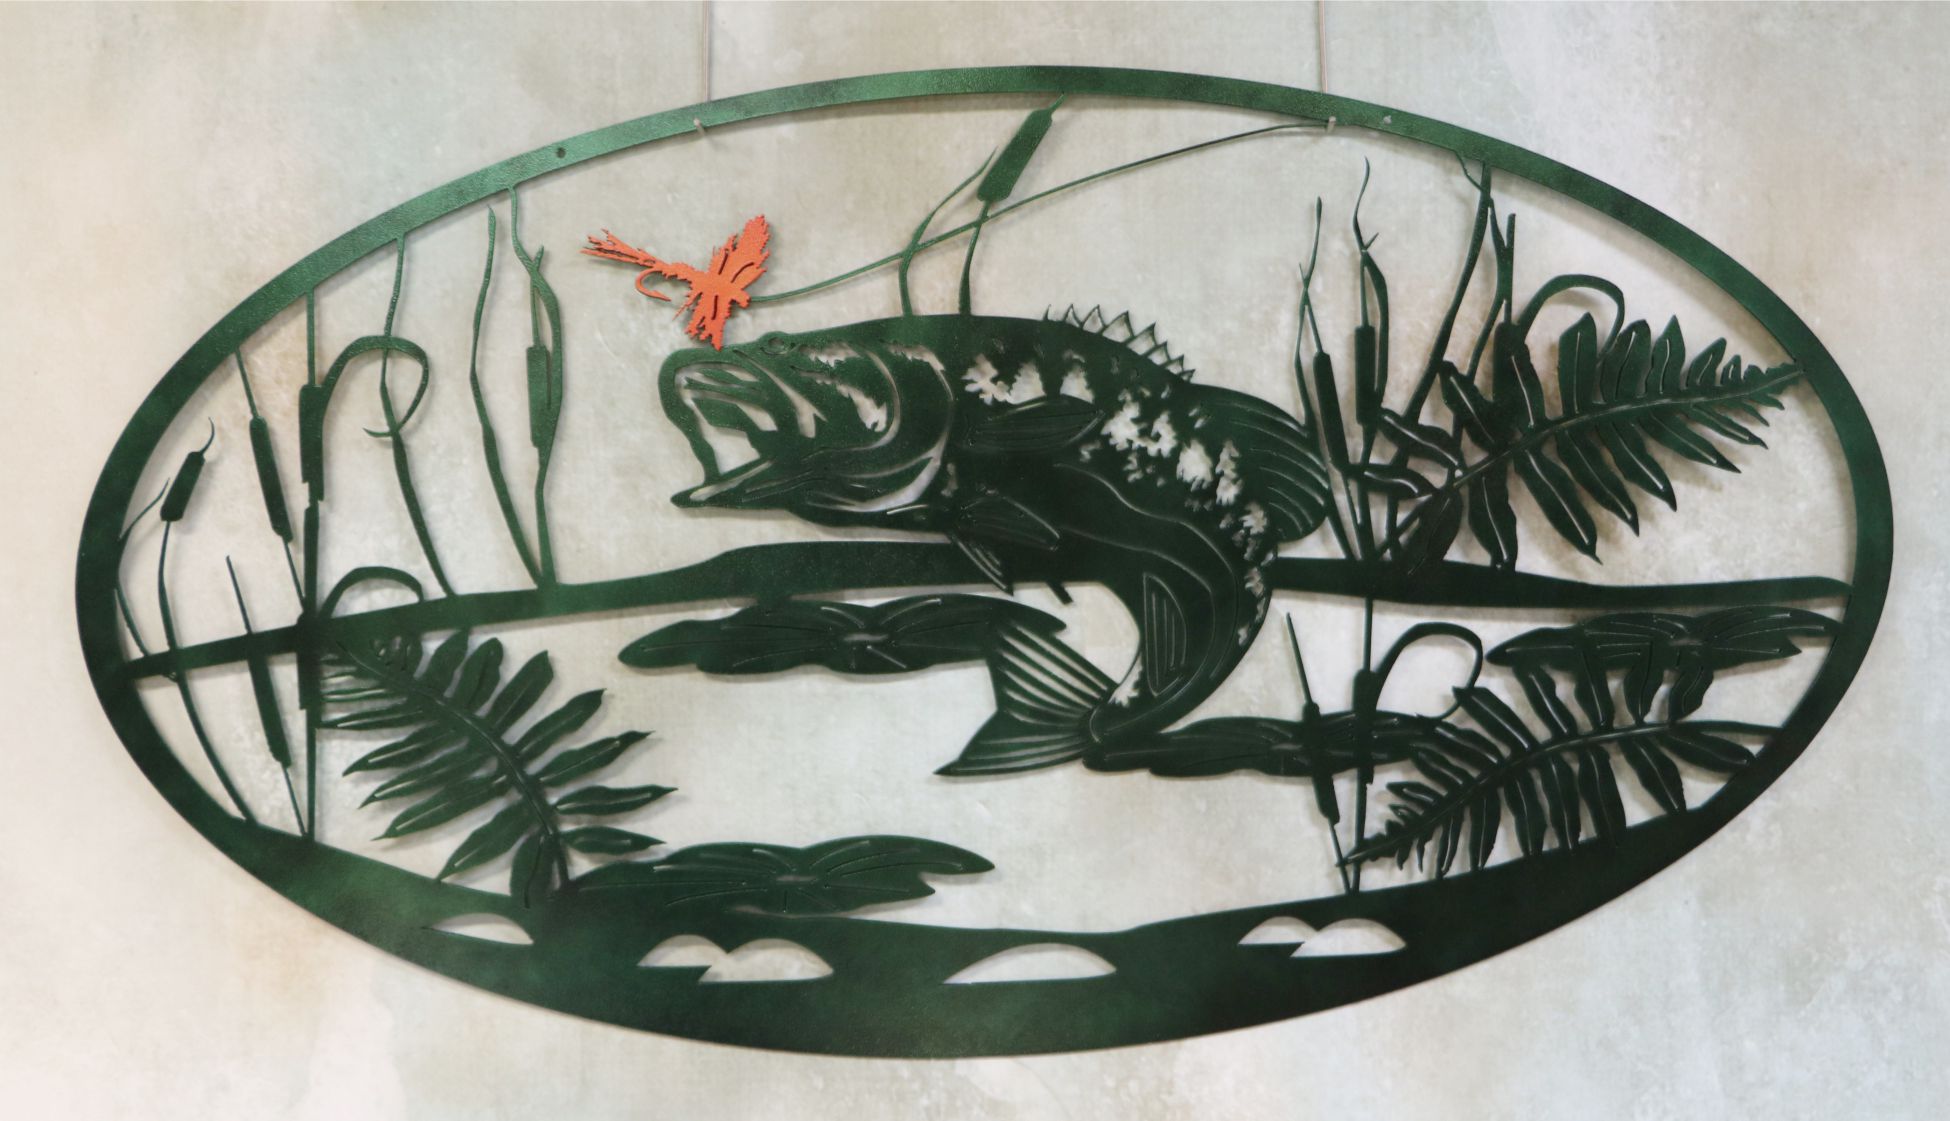 Metal Wall Art Oval, Catching Fish, Lure, Fishing Line, Pond, Swamp, Cattails, Plants, Lilies